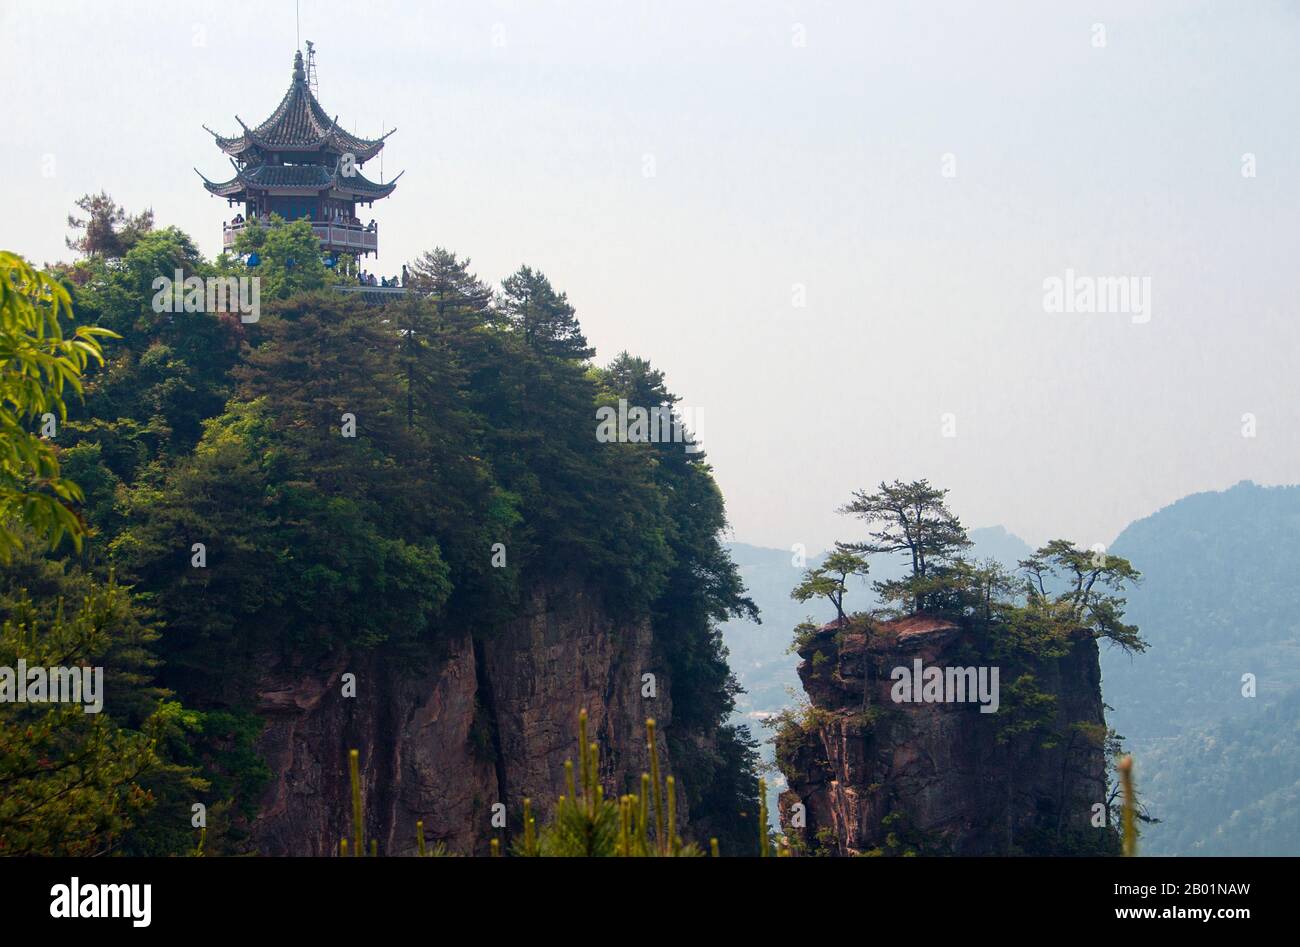 China: Six Wonders Pagoda, Wulingyuan Scenic Area (Zhangjiajie), Hunan Province.  Wulingyuan Scenic Reserve is a scenic and historic interest area in Hunan Province. It is noted for its approximately 3,100 tall quartzite sandstone pillars, some of which are over 800 metres (2,600 ft) in height and are a type of karst formation. In 1992 it was designated a UNESCO World Heritage Site. Stock Photo